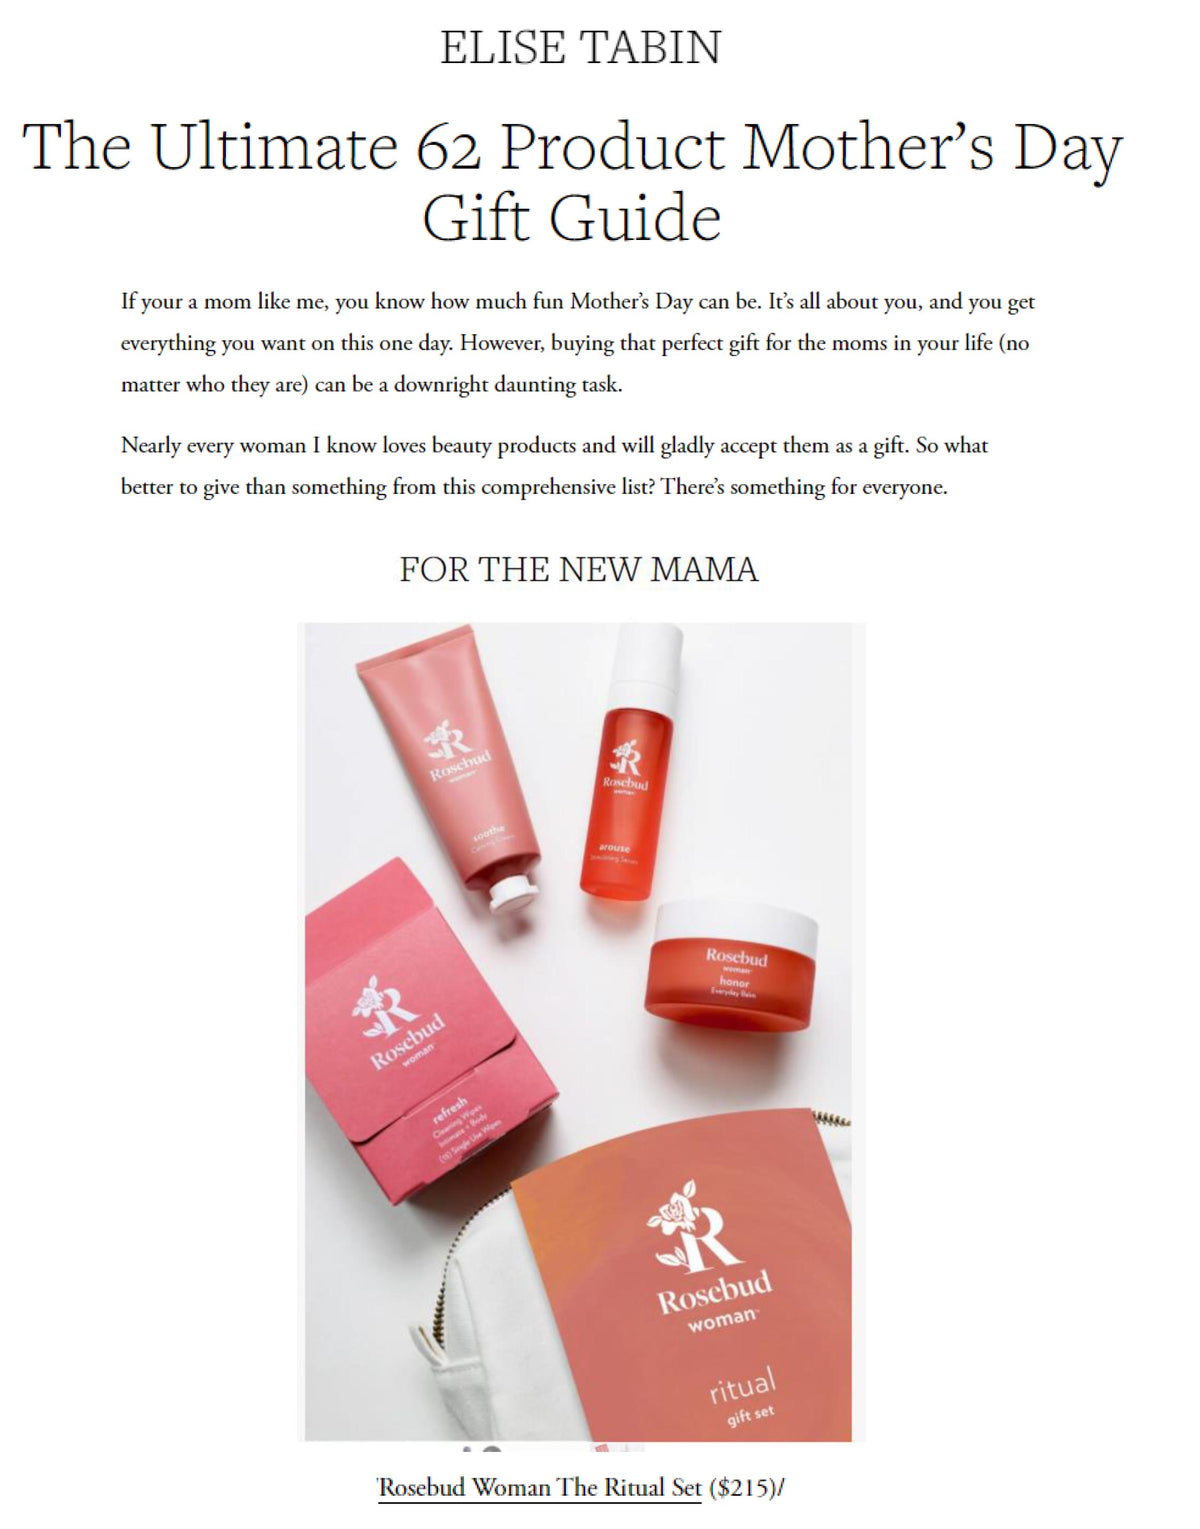 Elise Tabin: The Ultimate 62 Product Mother's Day Gift Guide